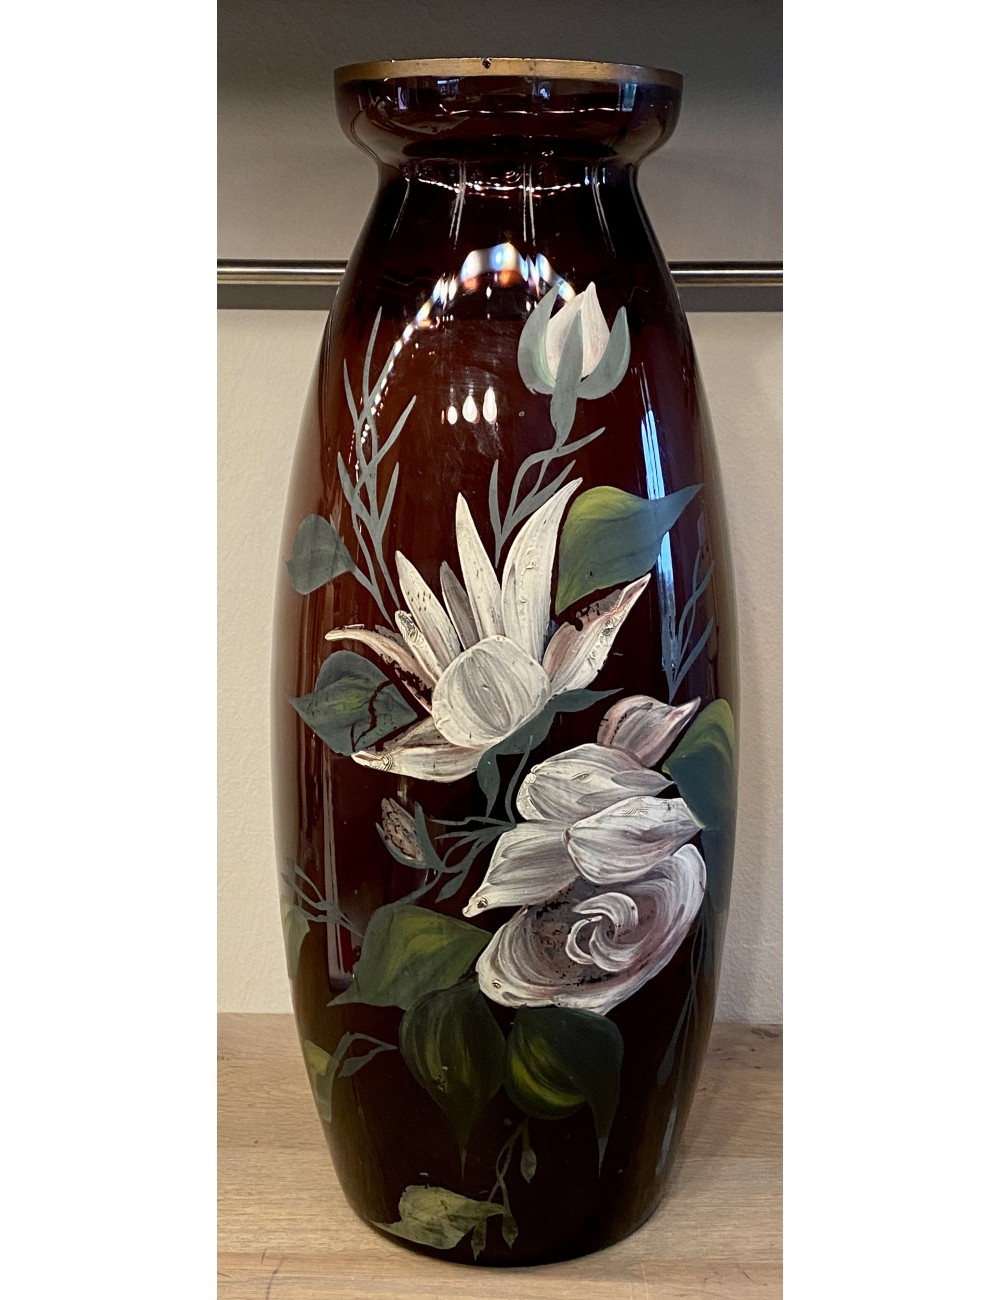 Vase glass - high model - Booms (?) - décor with hand-painted flowers